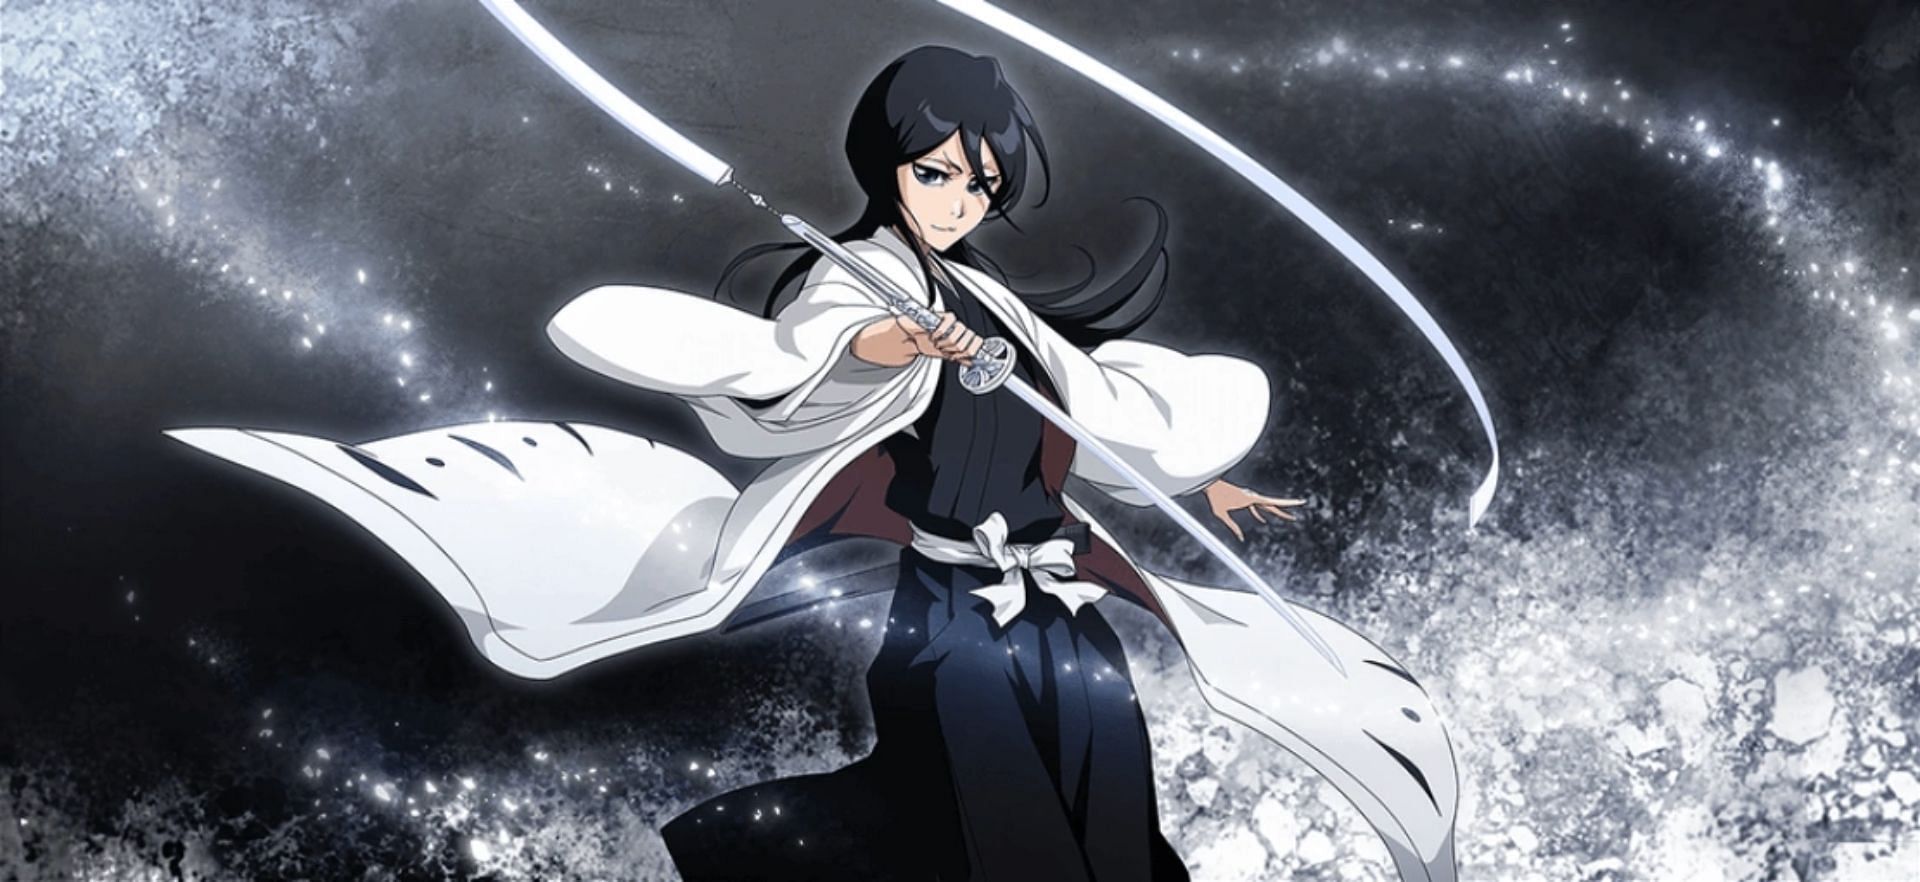 Bleach TYBW: When does Rukia come back to the anime, explained